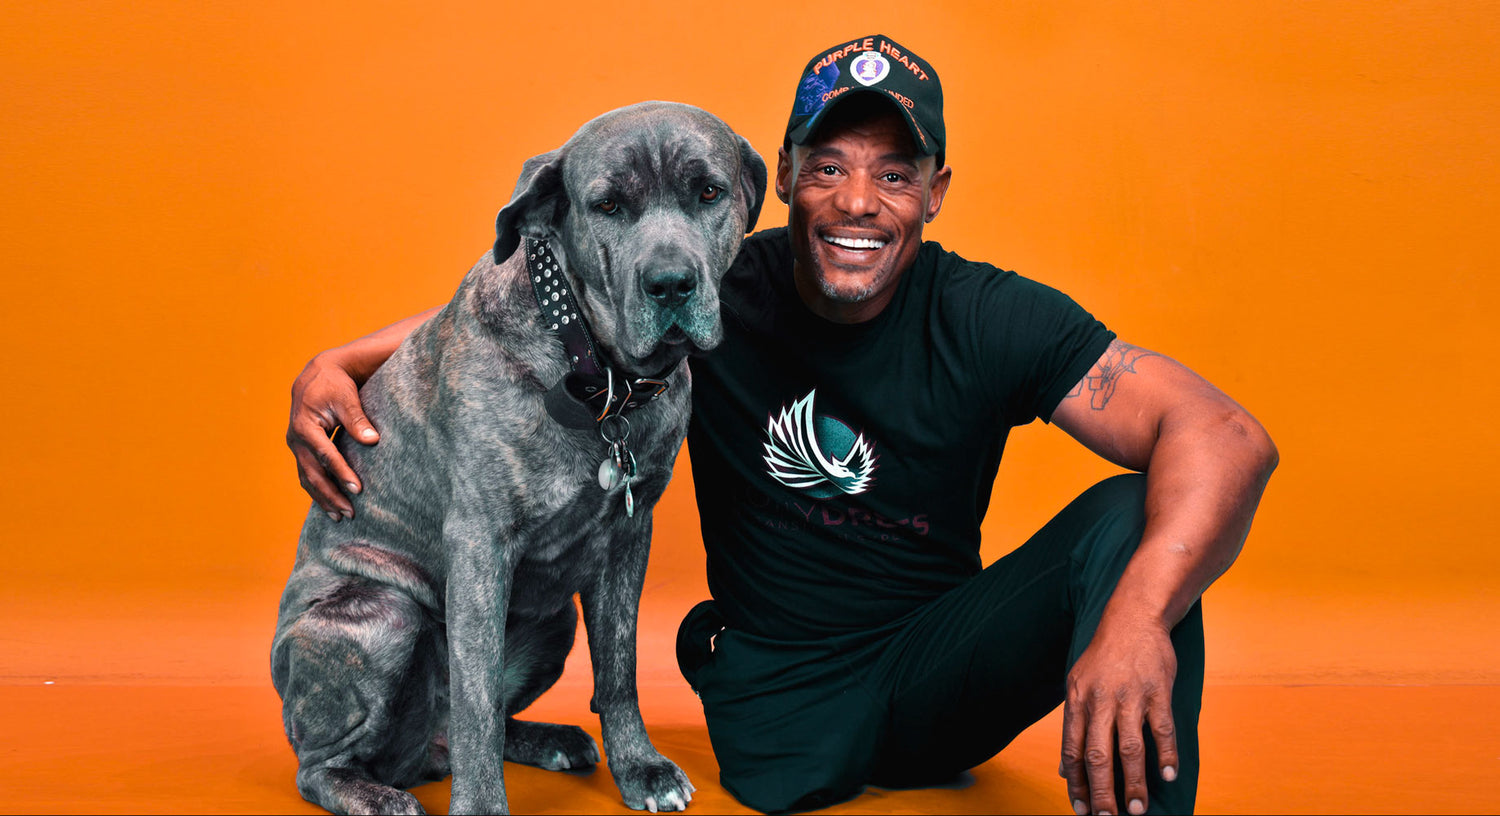 AMPLIFE SUPPORTER TONY DREES SMILING WITH HIS DOG AGAINST AN ORANGE BACKGROUND